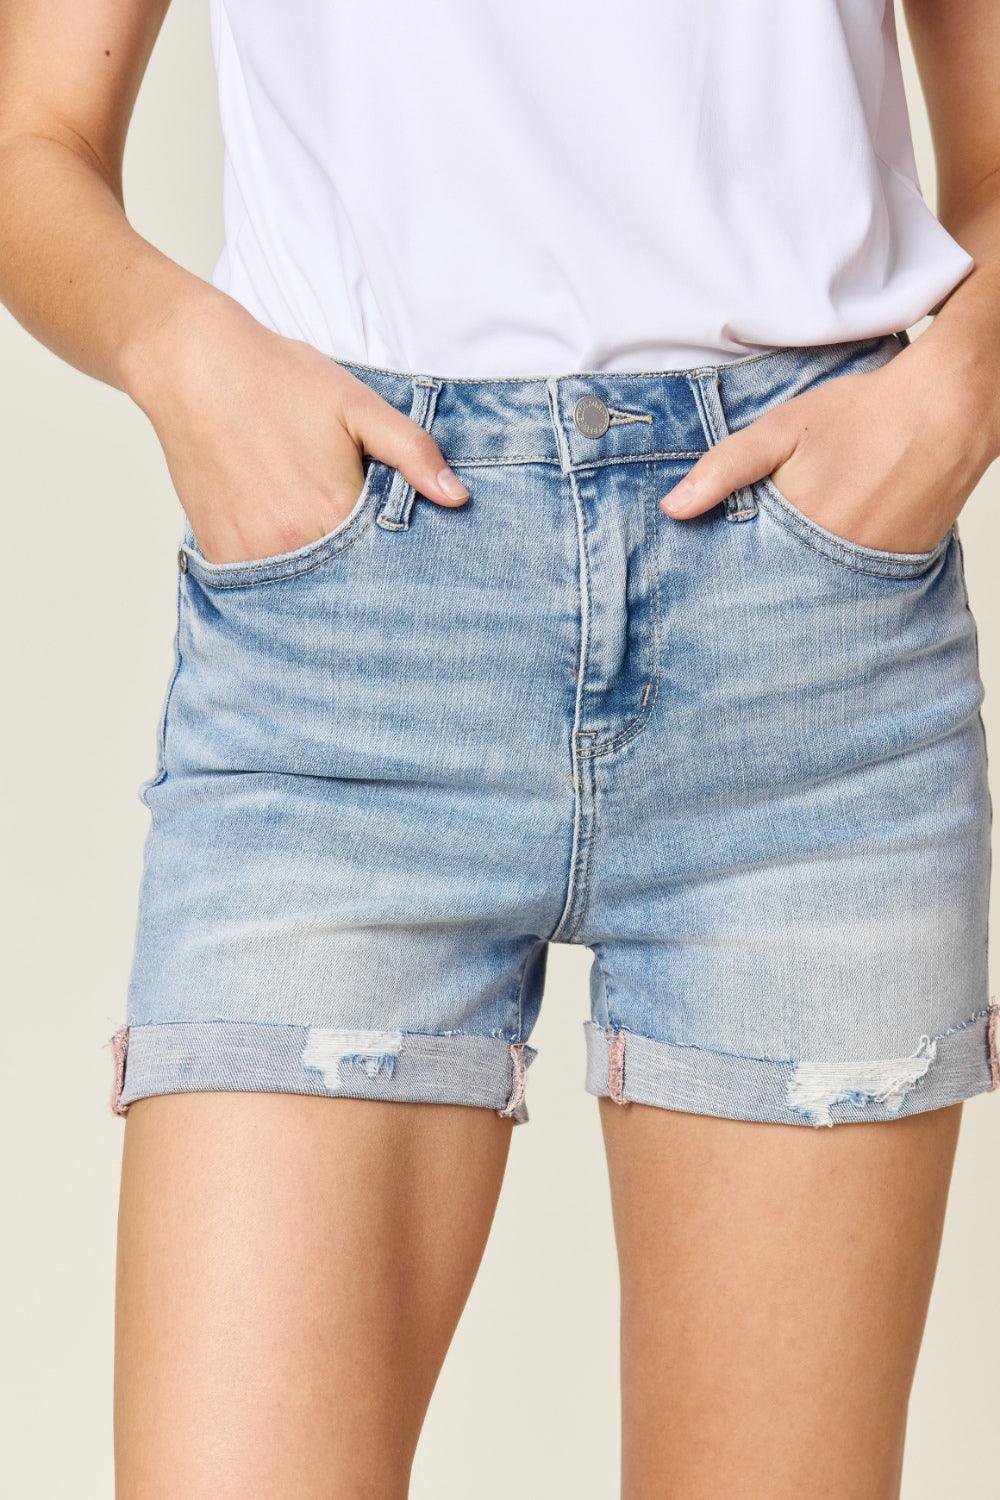 Judy Blue Full Size High Waist Rolled Denim Shorts - God's Girl Gifts And Apparel